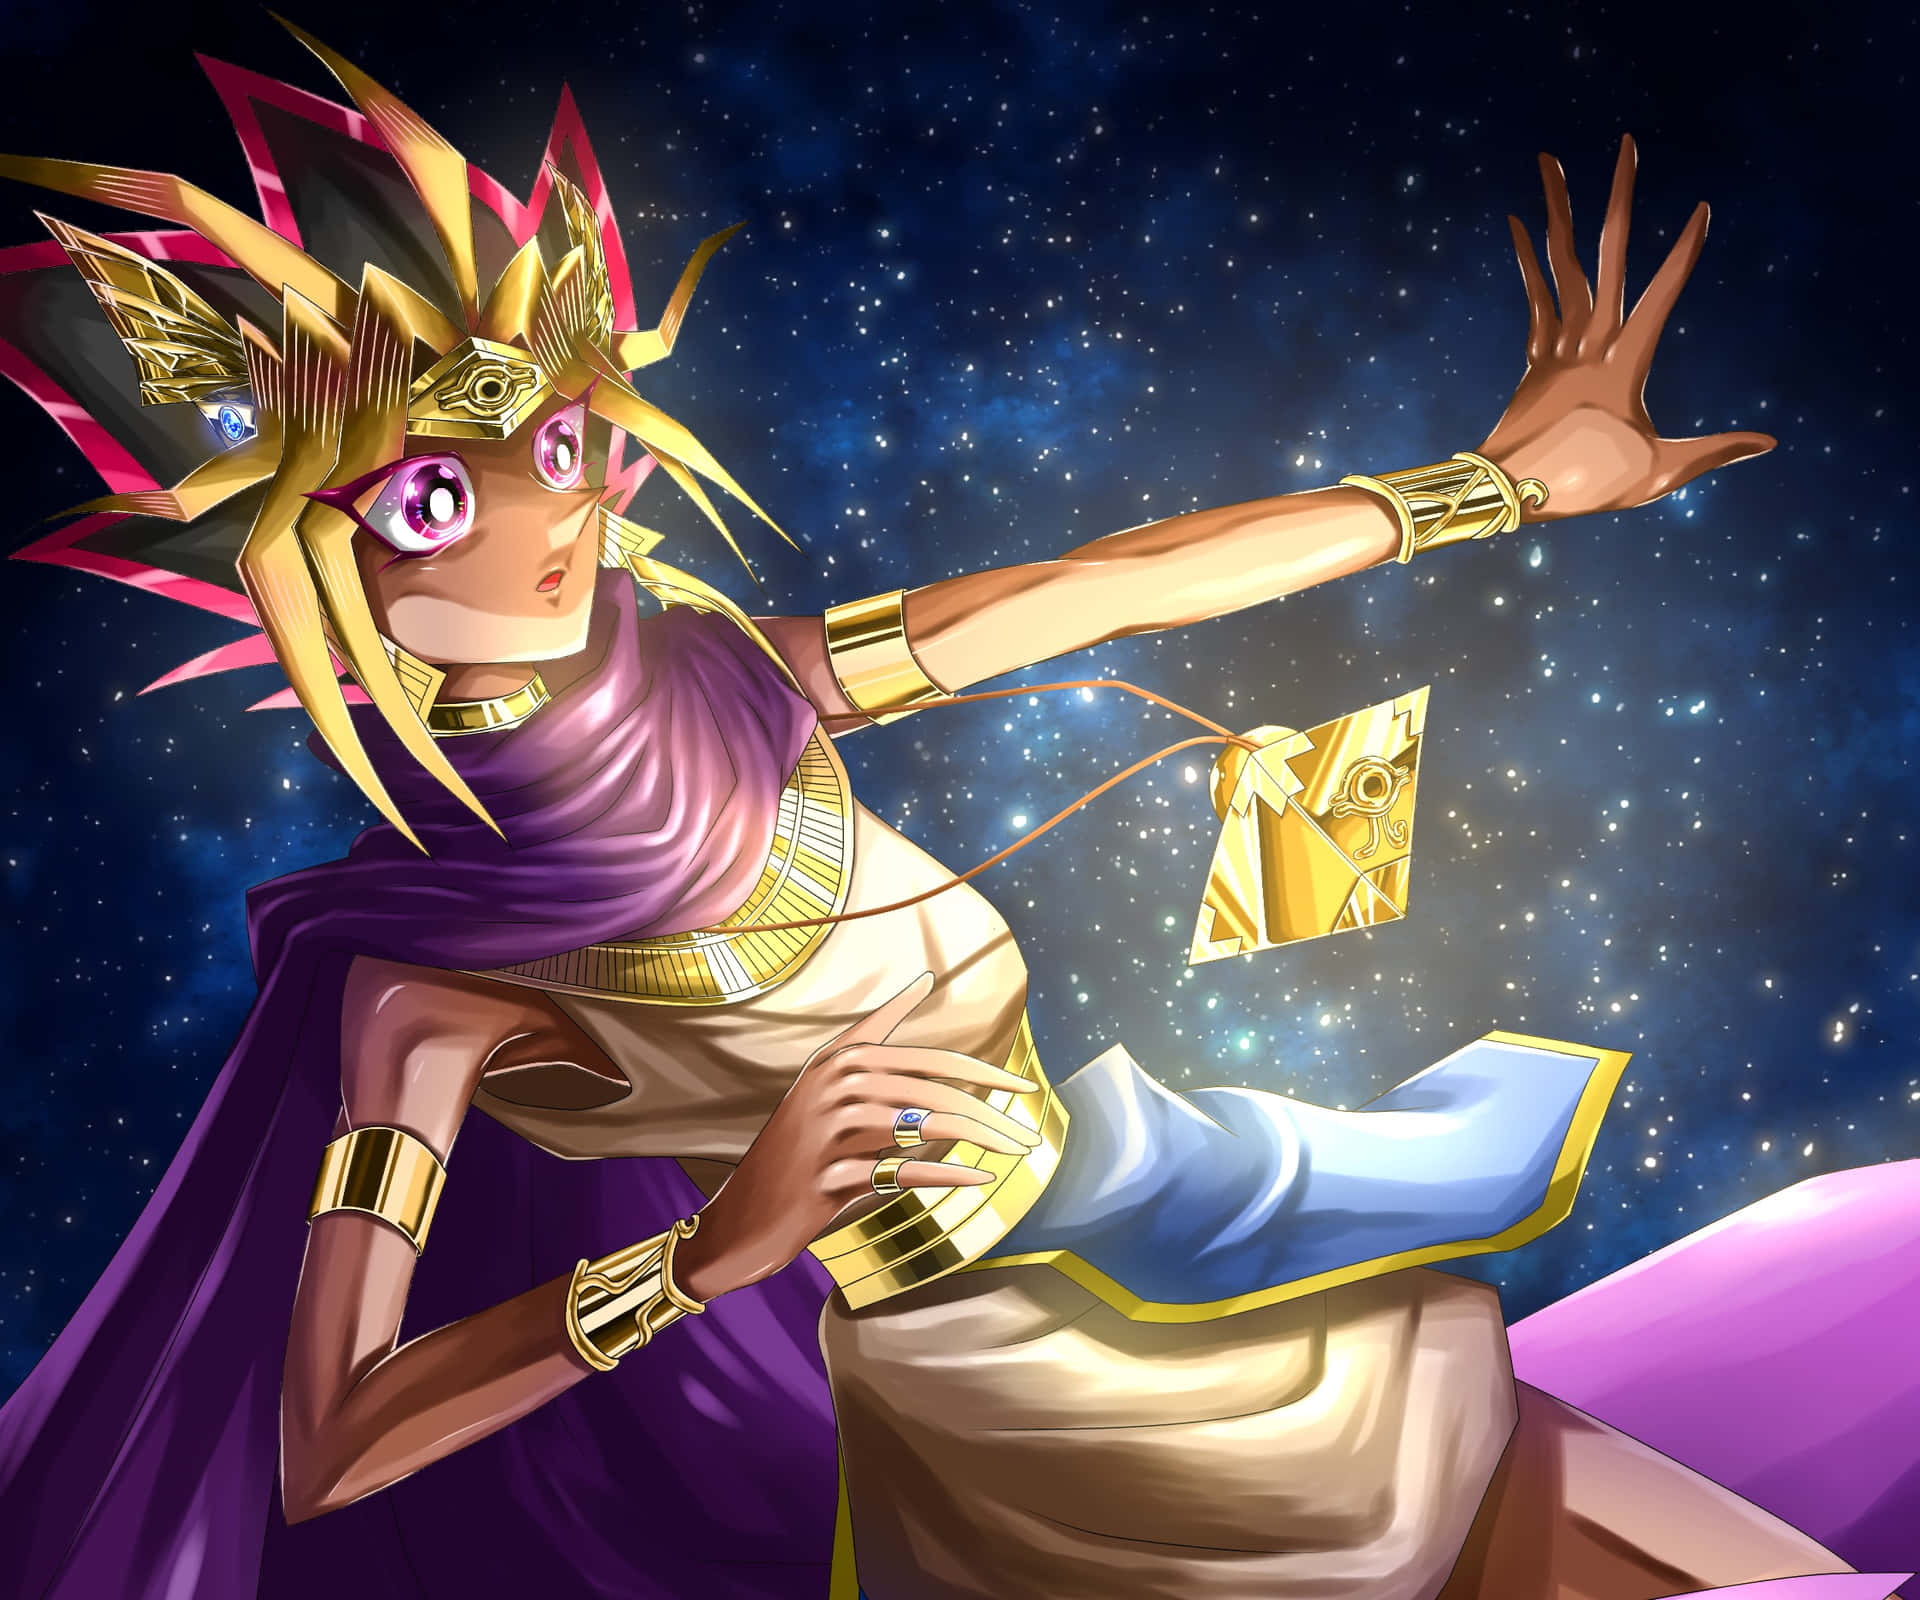 The Powerful Yami Yugi - Duel Master at His Finest Wallpaper